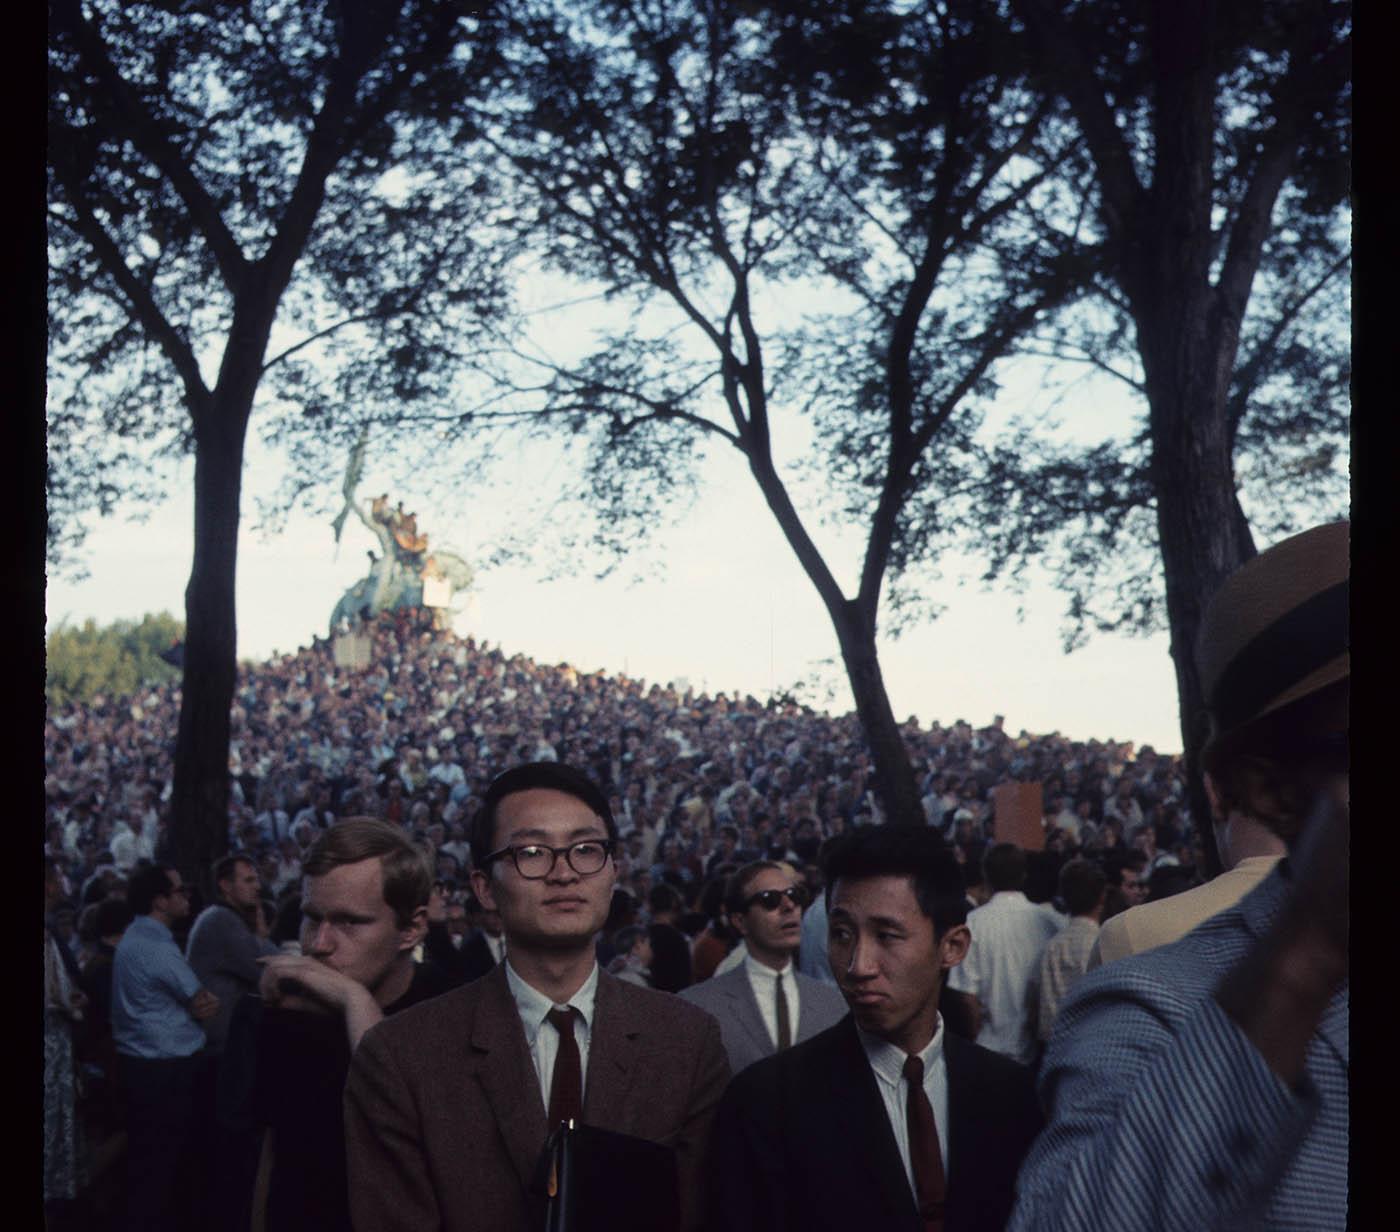 Protesters in Chicago's Grant Park during the 1968 Democratic National Convention. Photo: Bea A. Carson